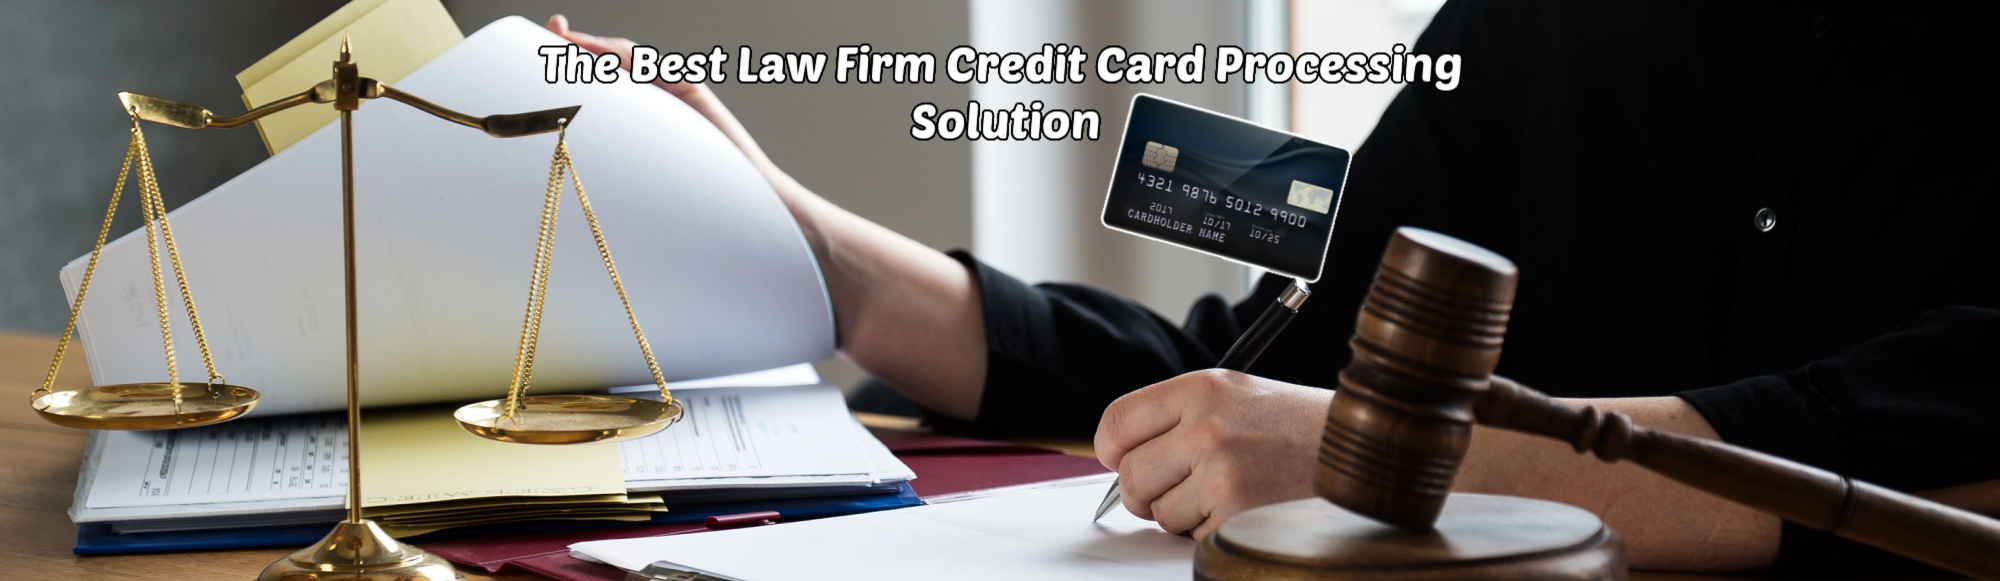 image of best law firm credit card peocessing solution